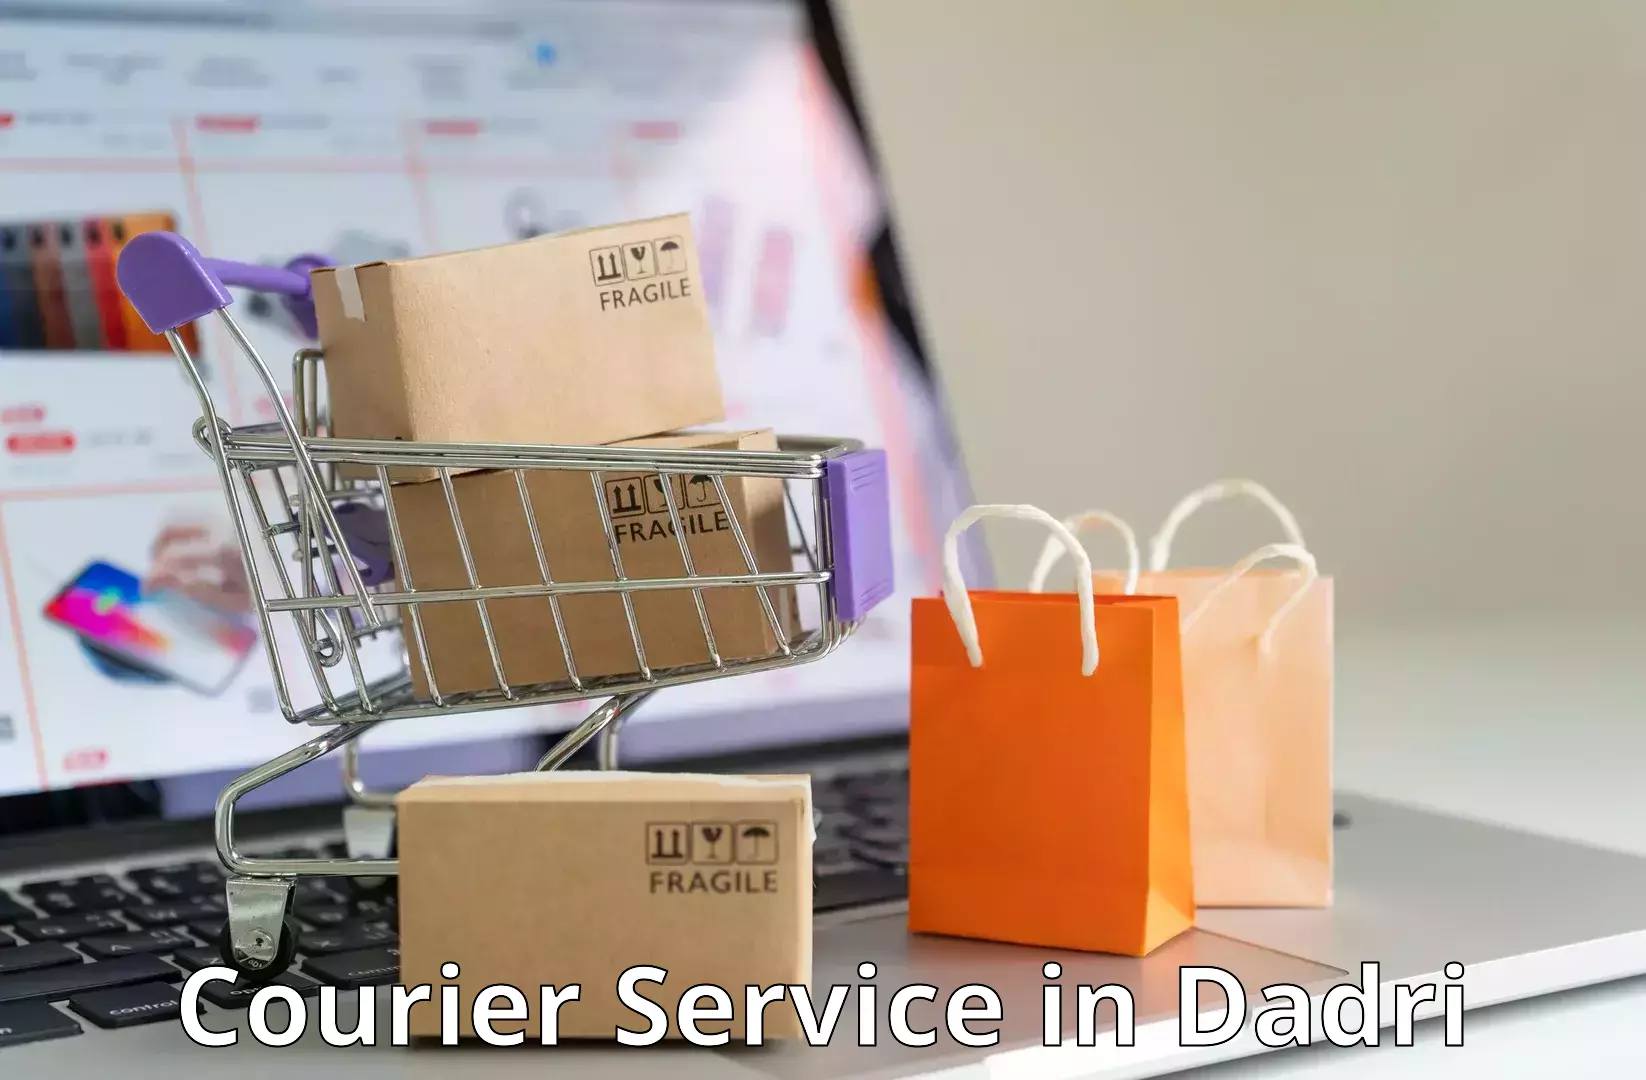 Reliable courier service in Dadri